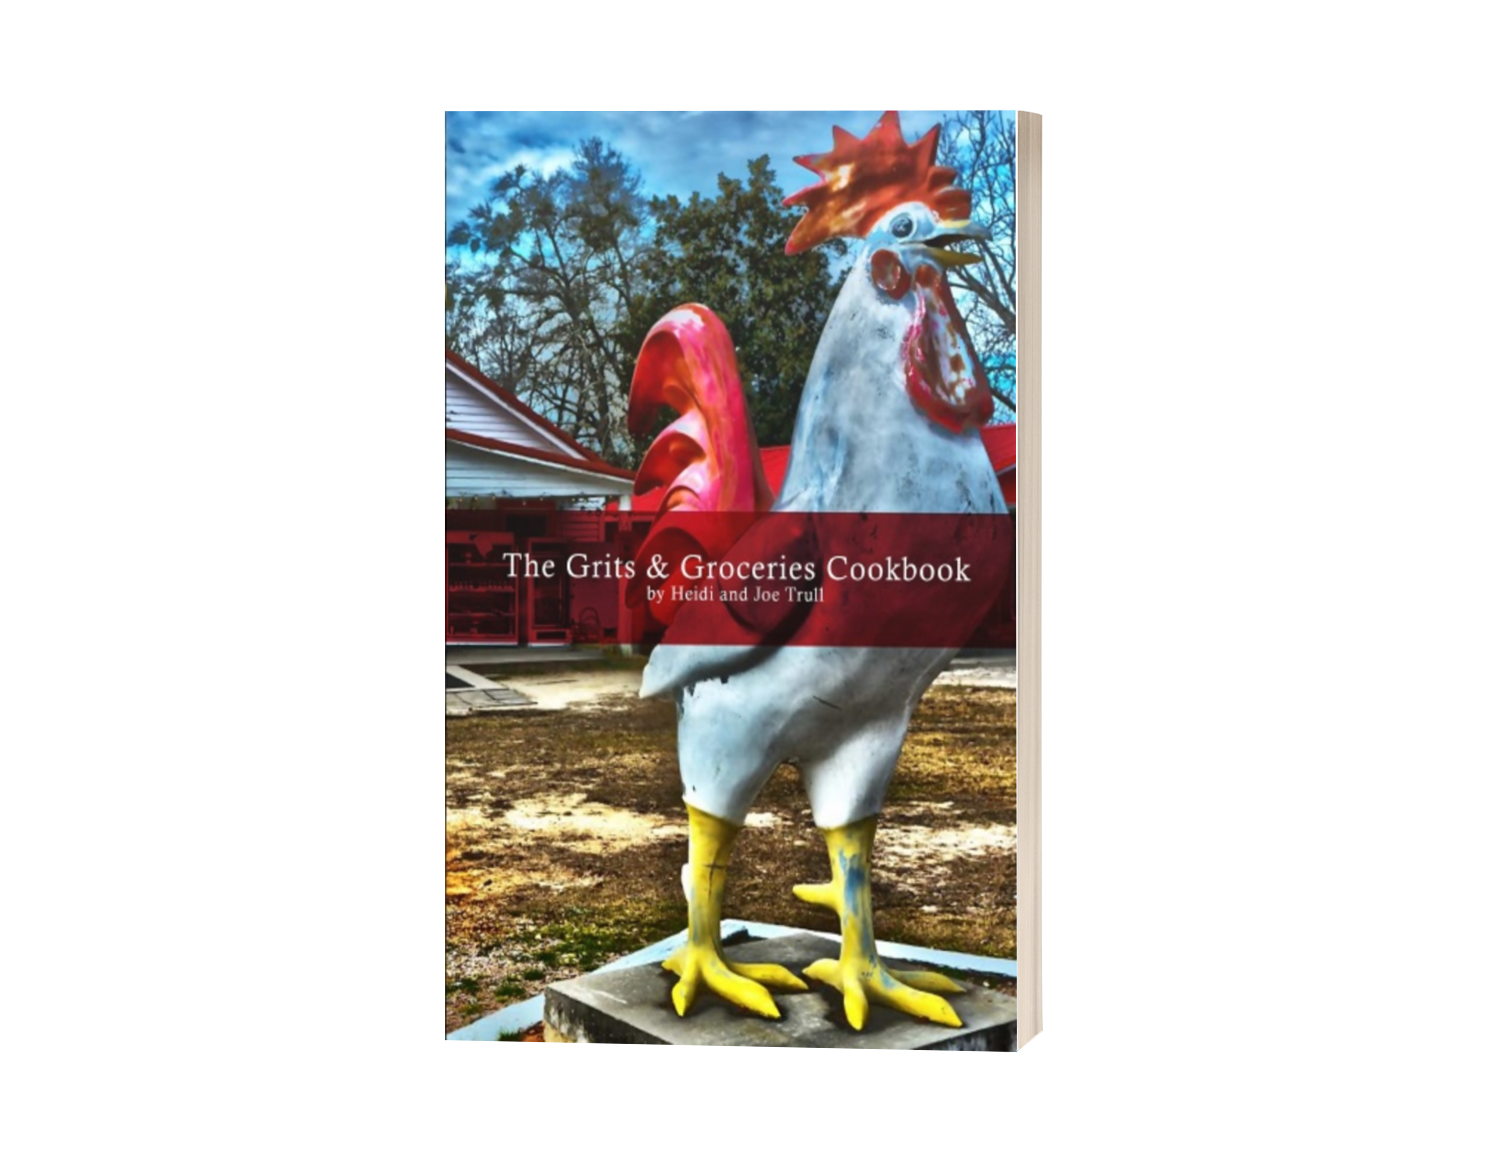 The Grits & Groceries Cookbook